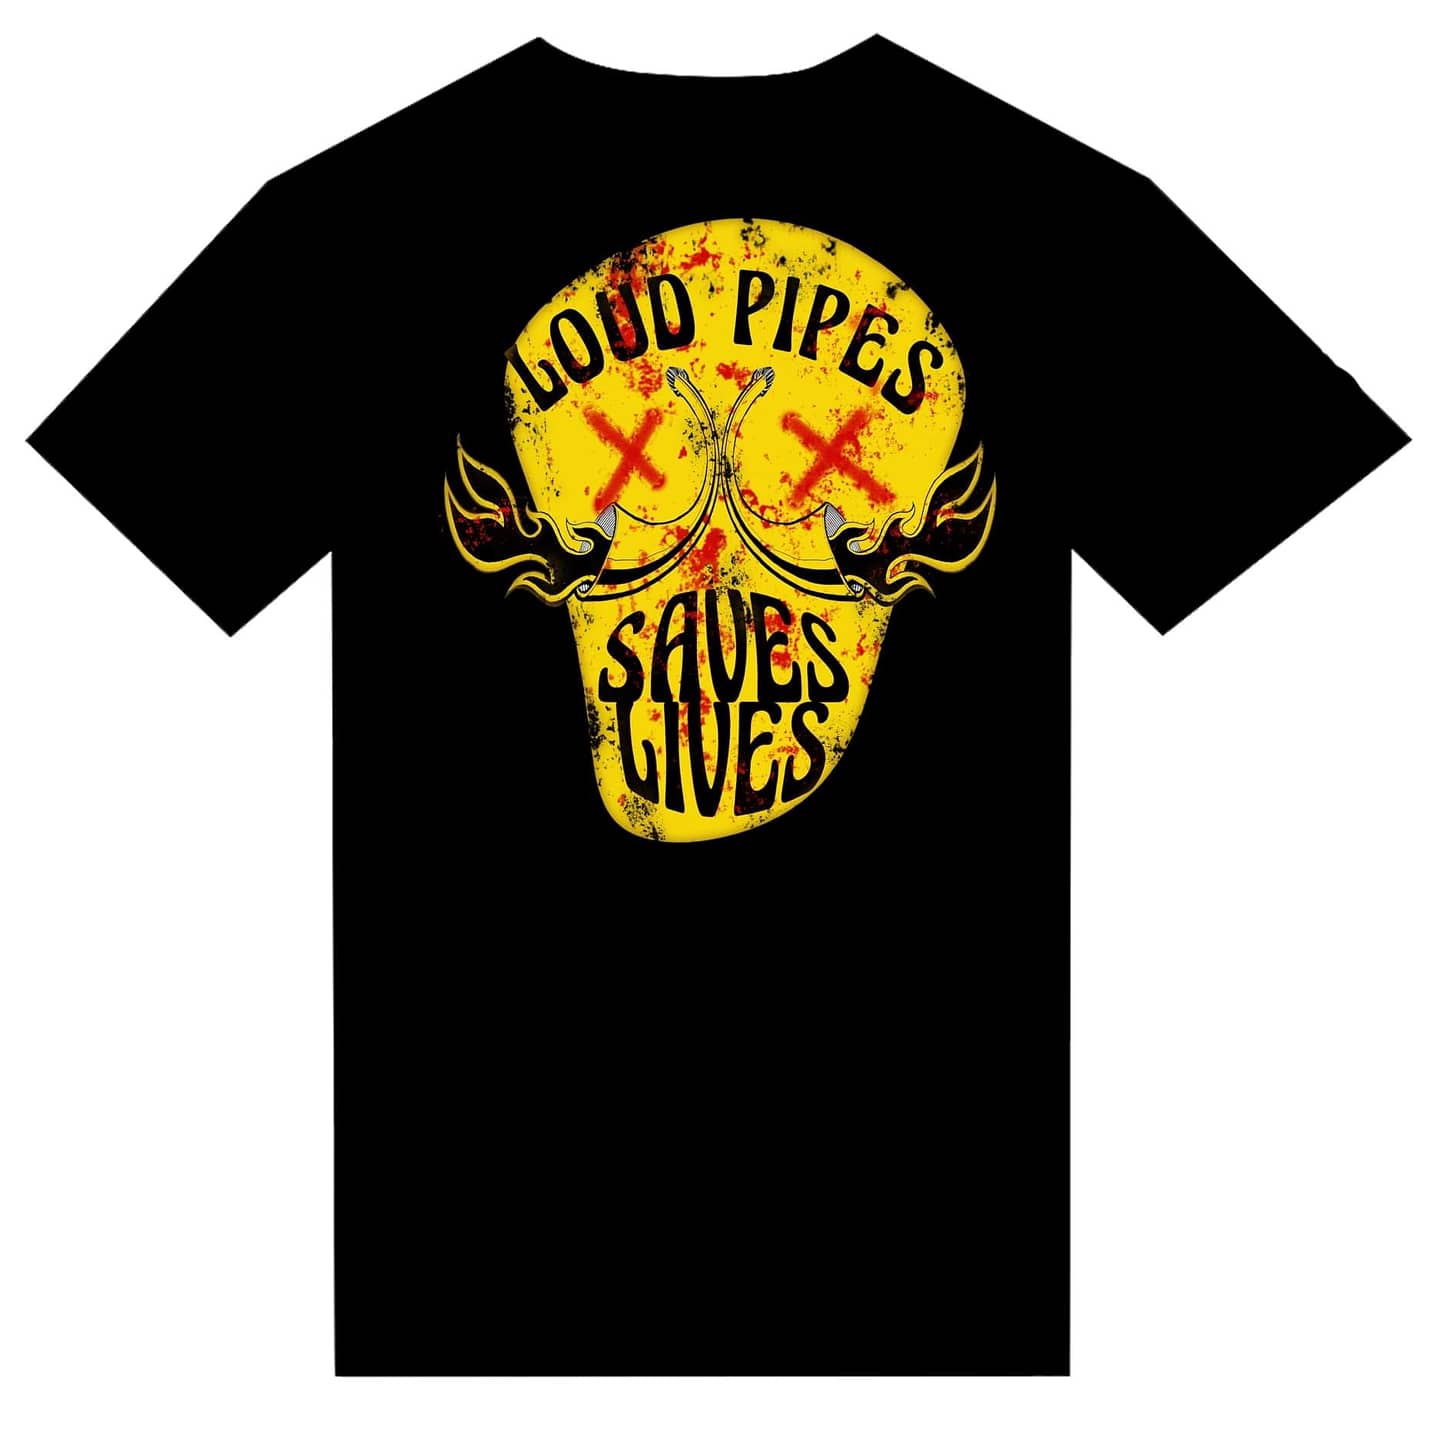 T-shirt "Loud Pipes Saves lives"